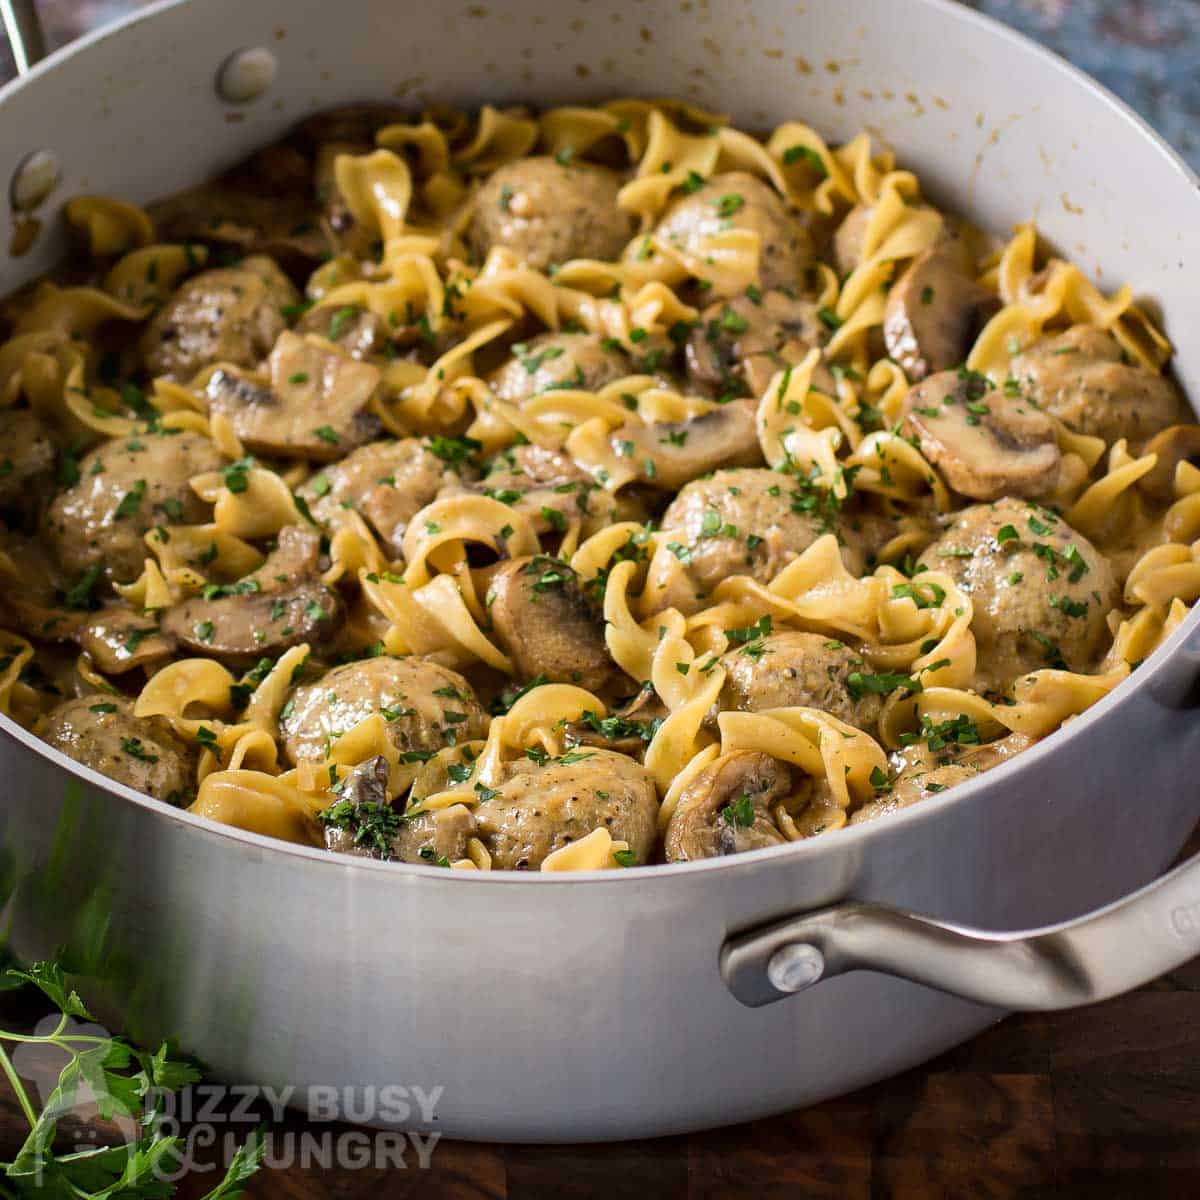 Side angled shot of a large silver pan full of meatball stroganoff garnished with fresh herbs on a wooden surface.